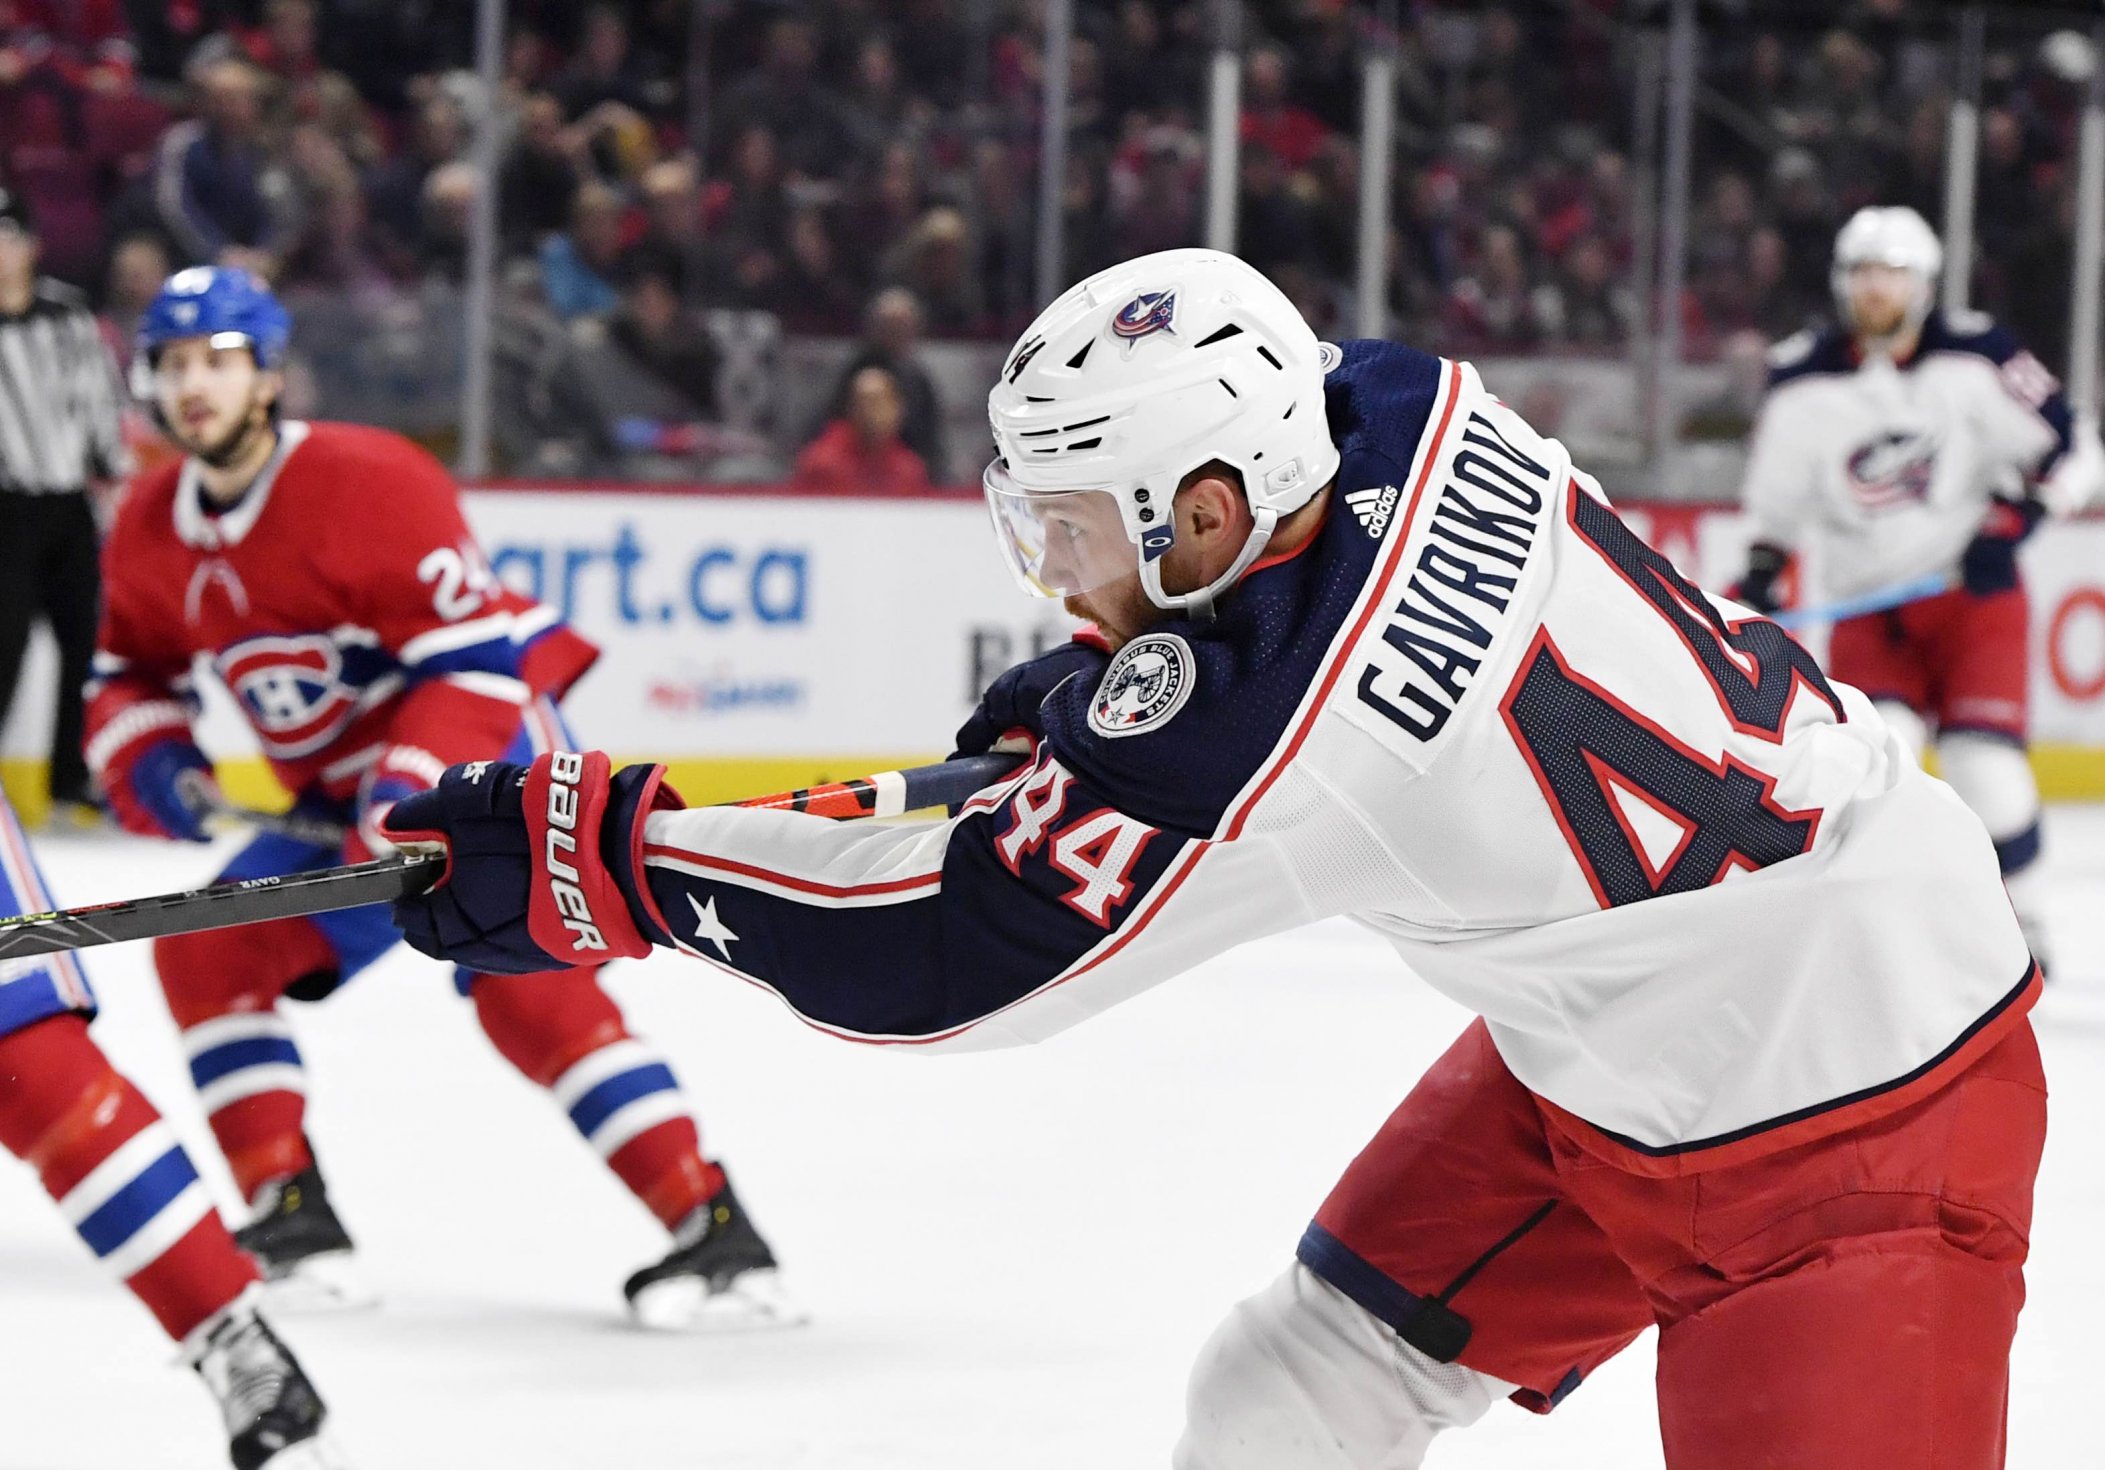 Blue Jackets' Bjorkstrand out 8-10 weeks with ankle injury